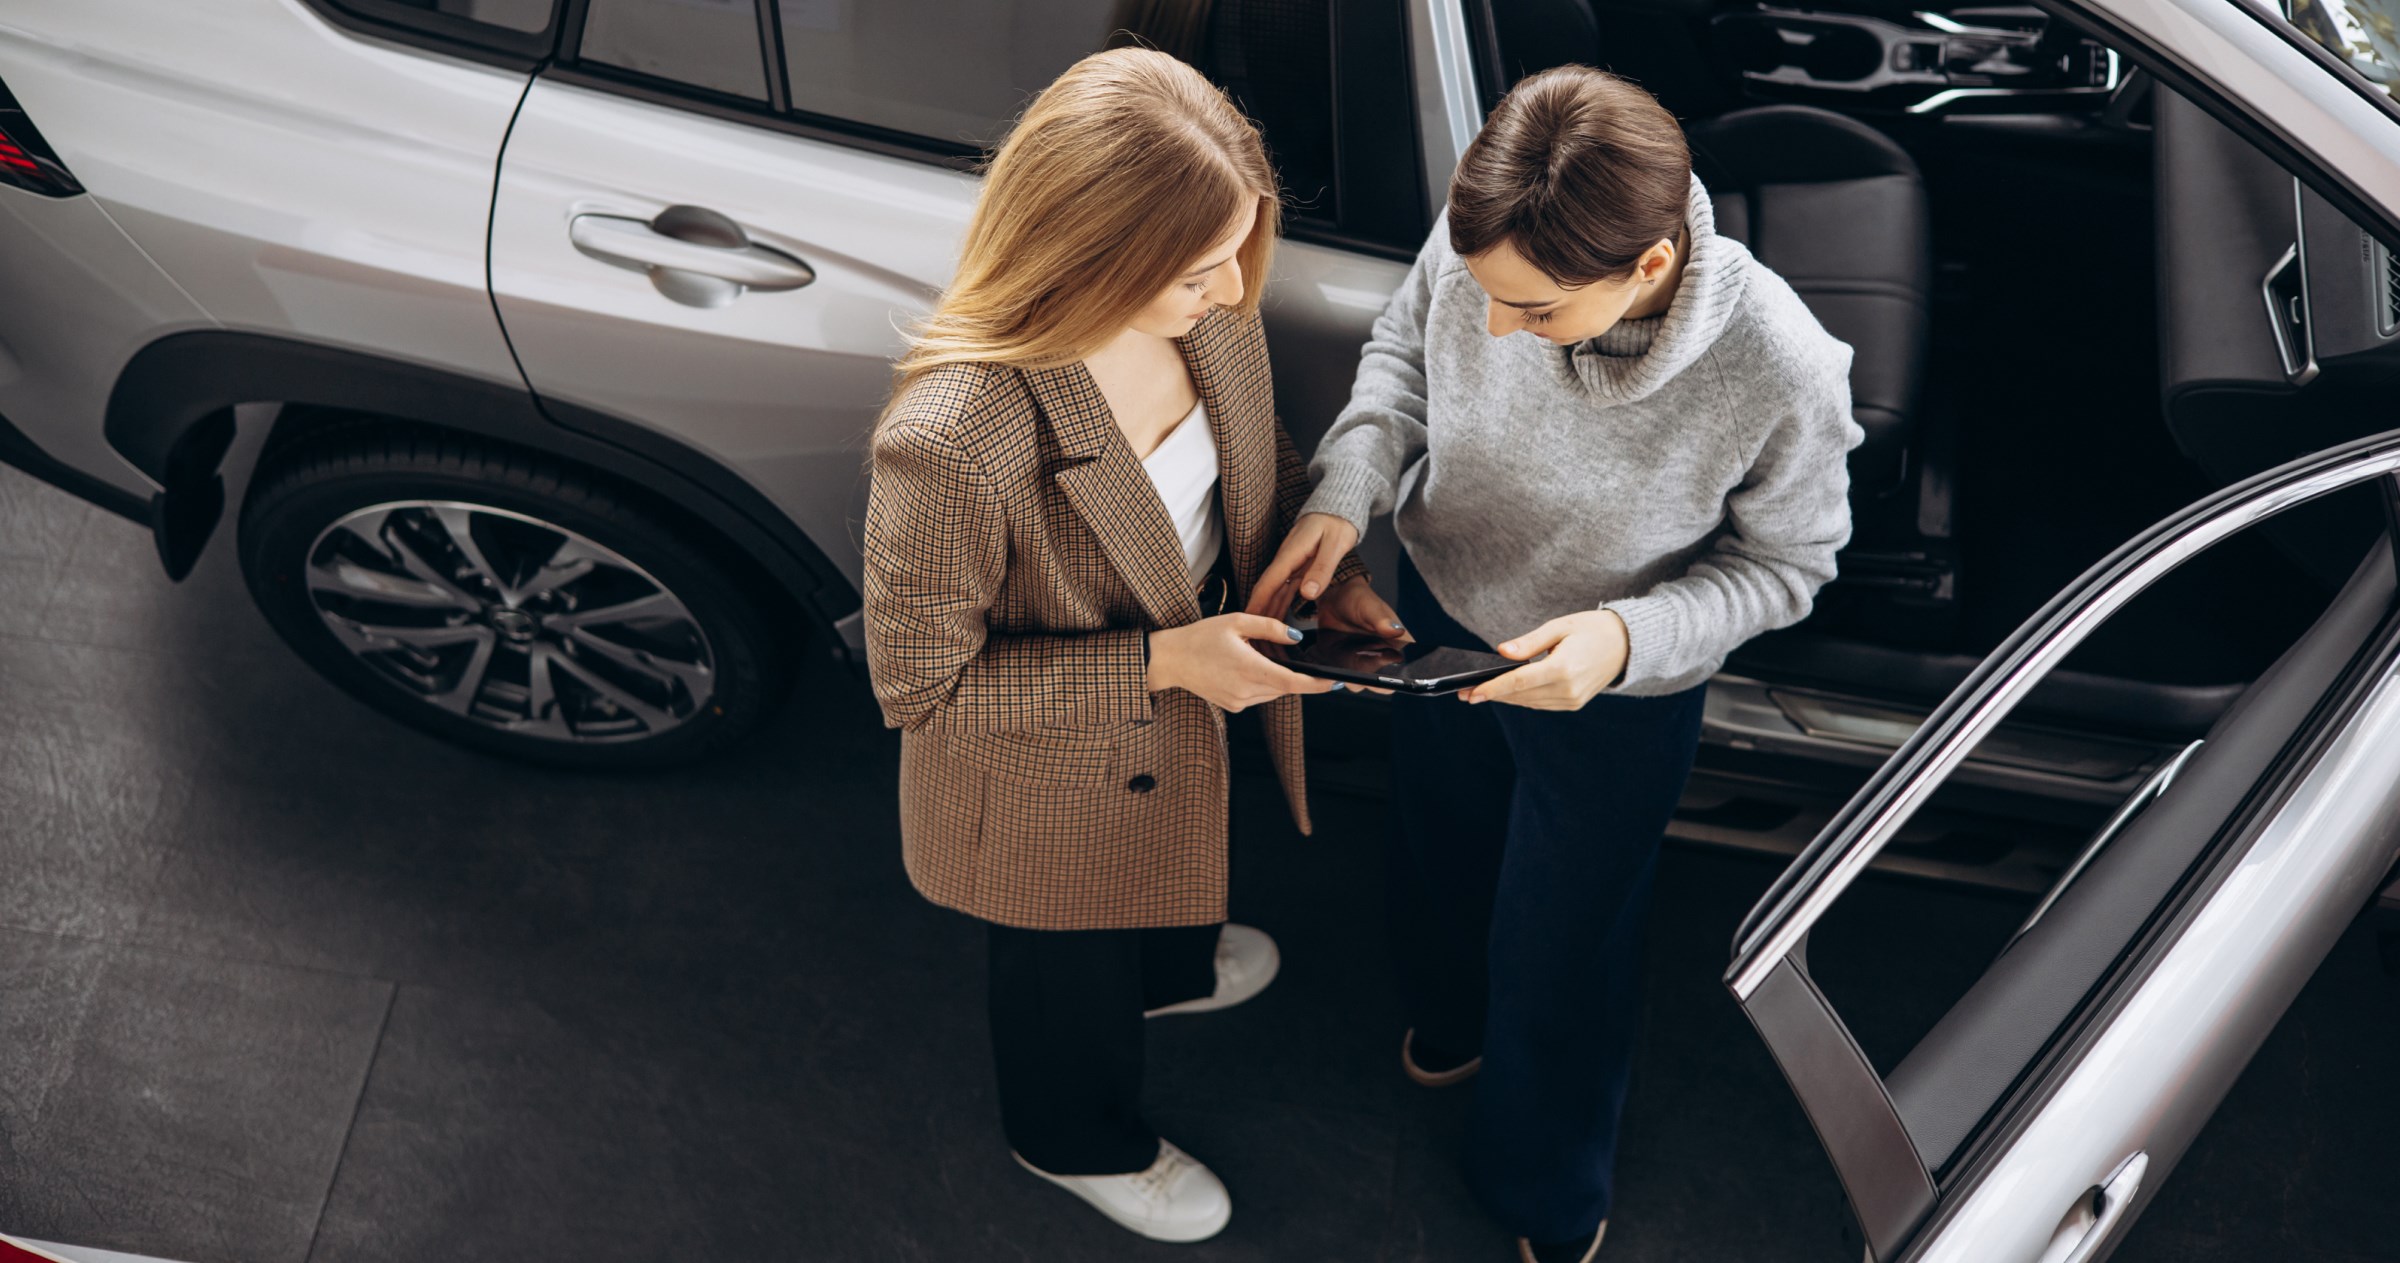 Two women stand next to an open SUV looking at a tablet.